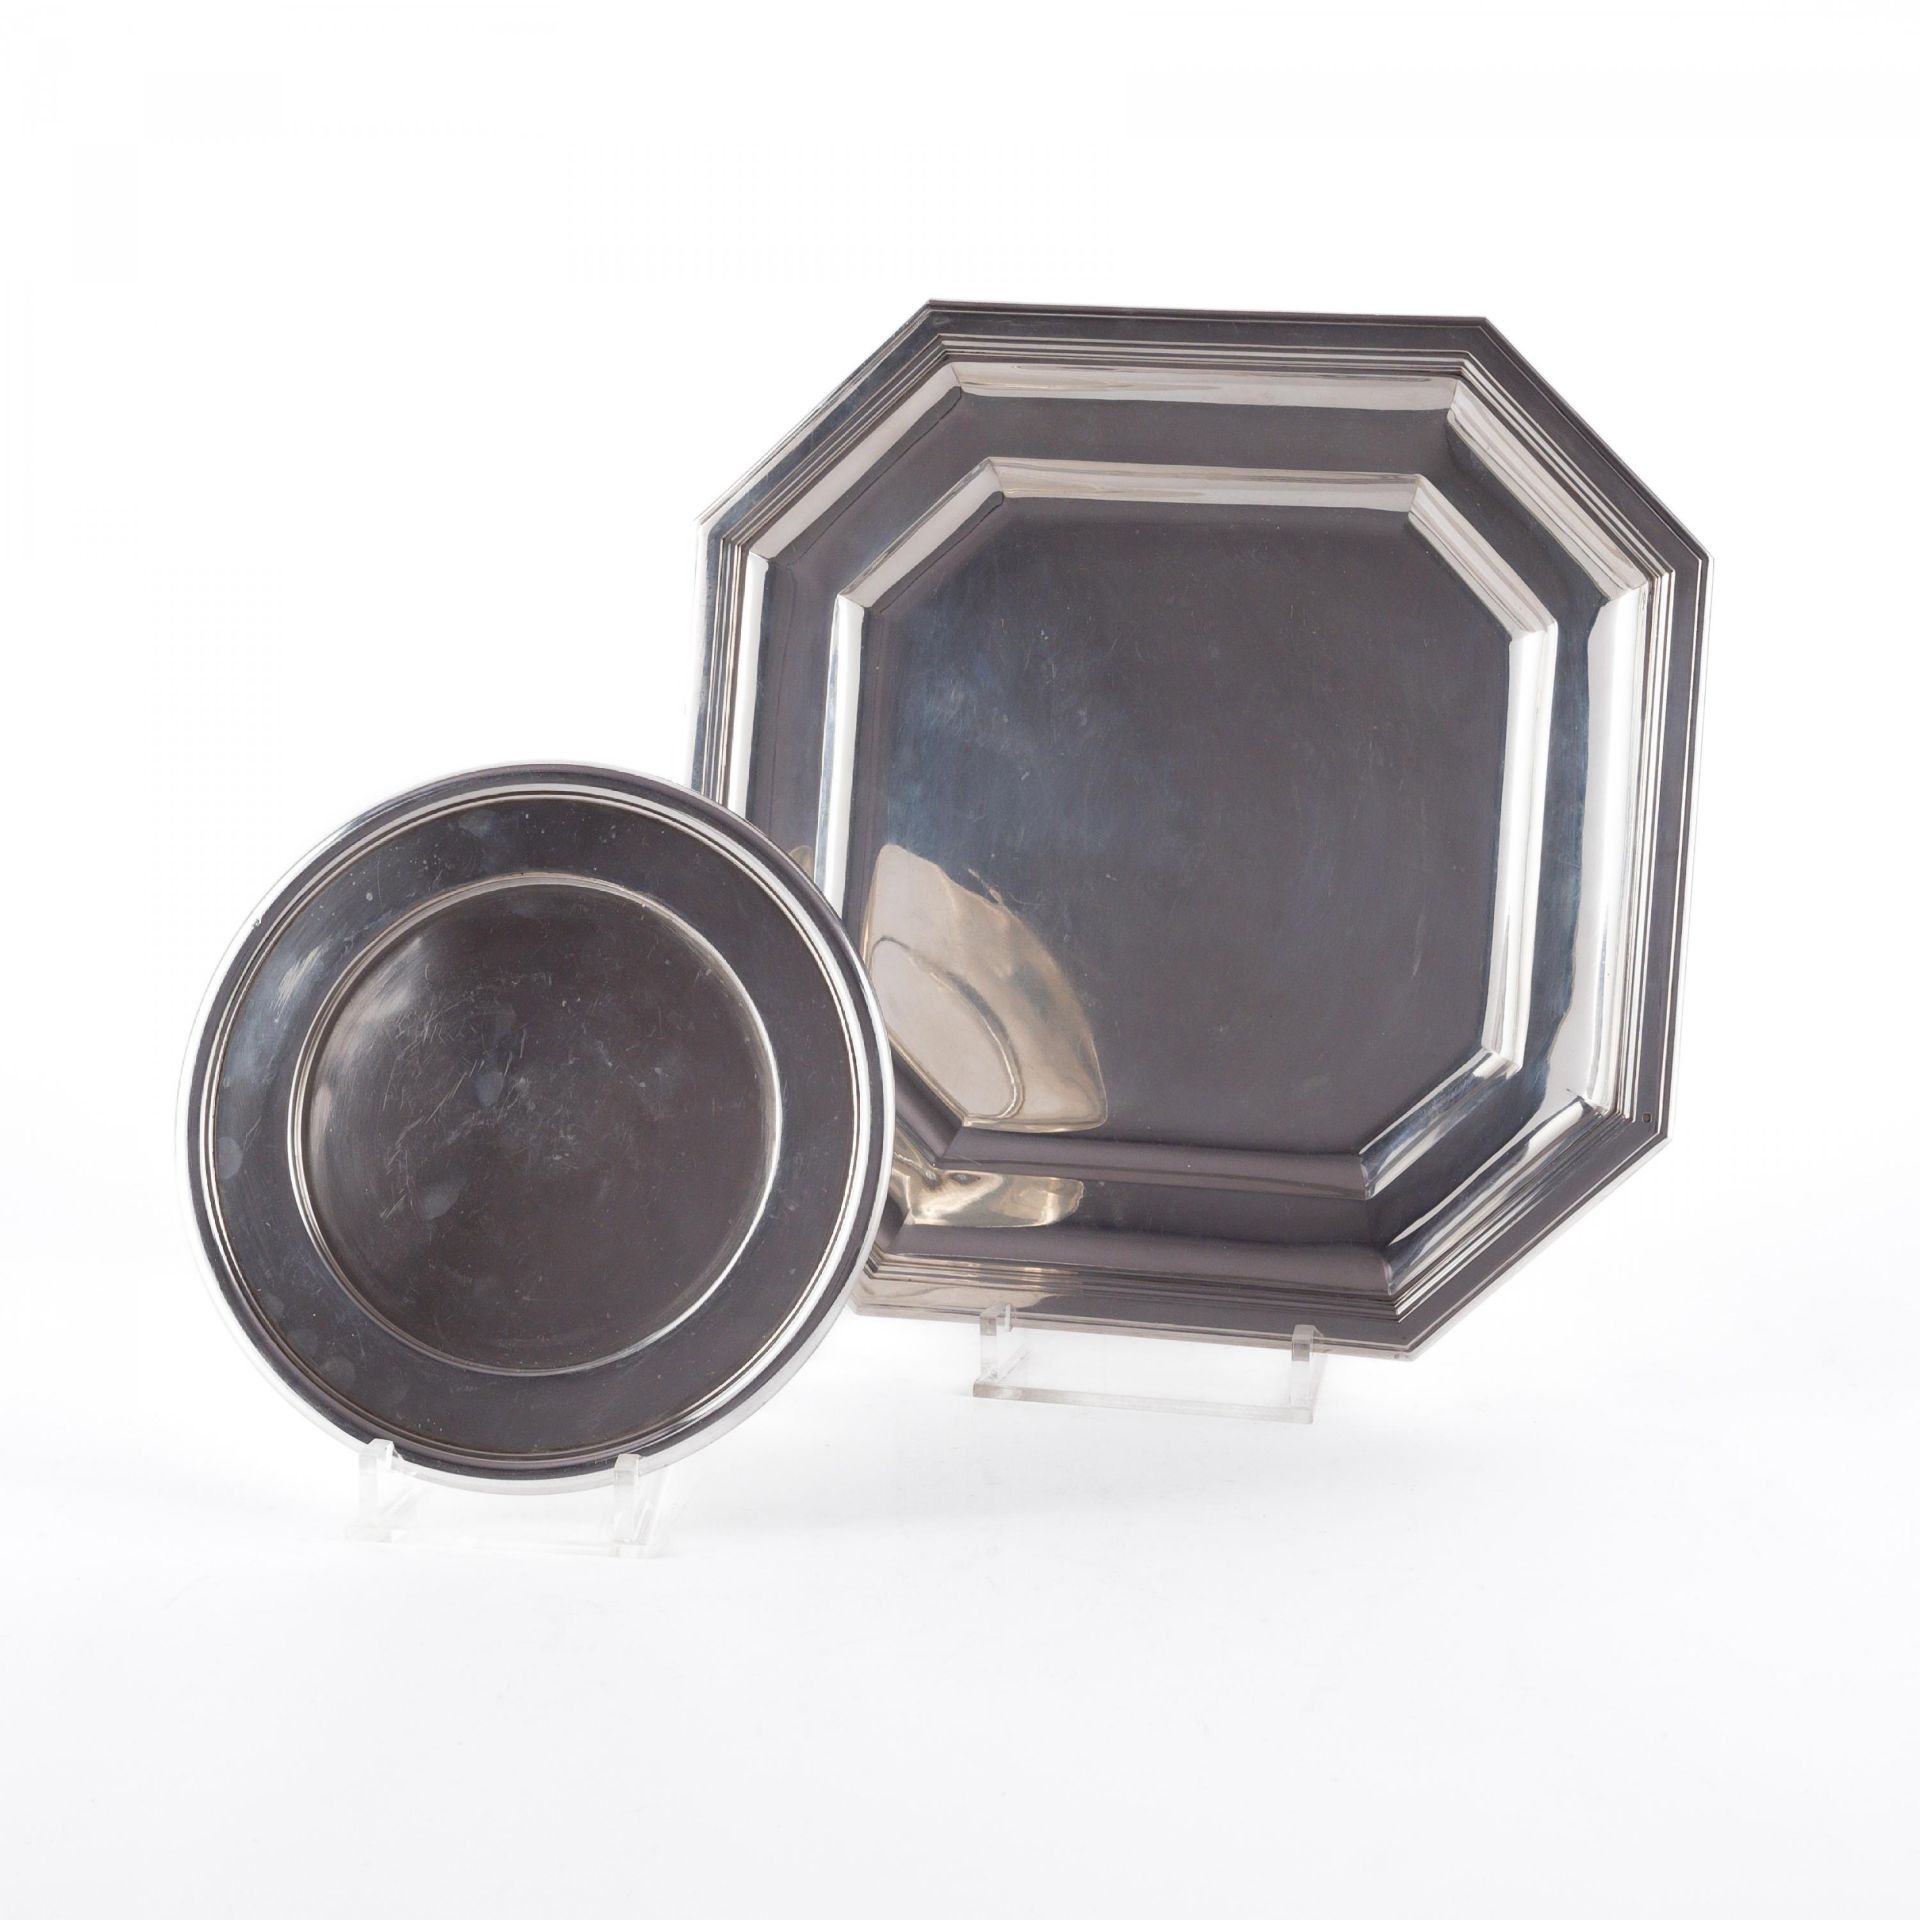 OCTAGONAL PLATTER AND ROUND STAND